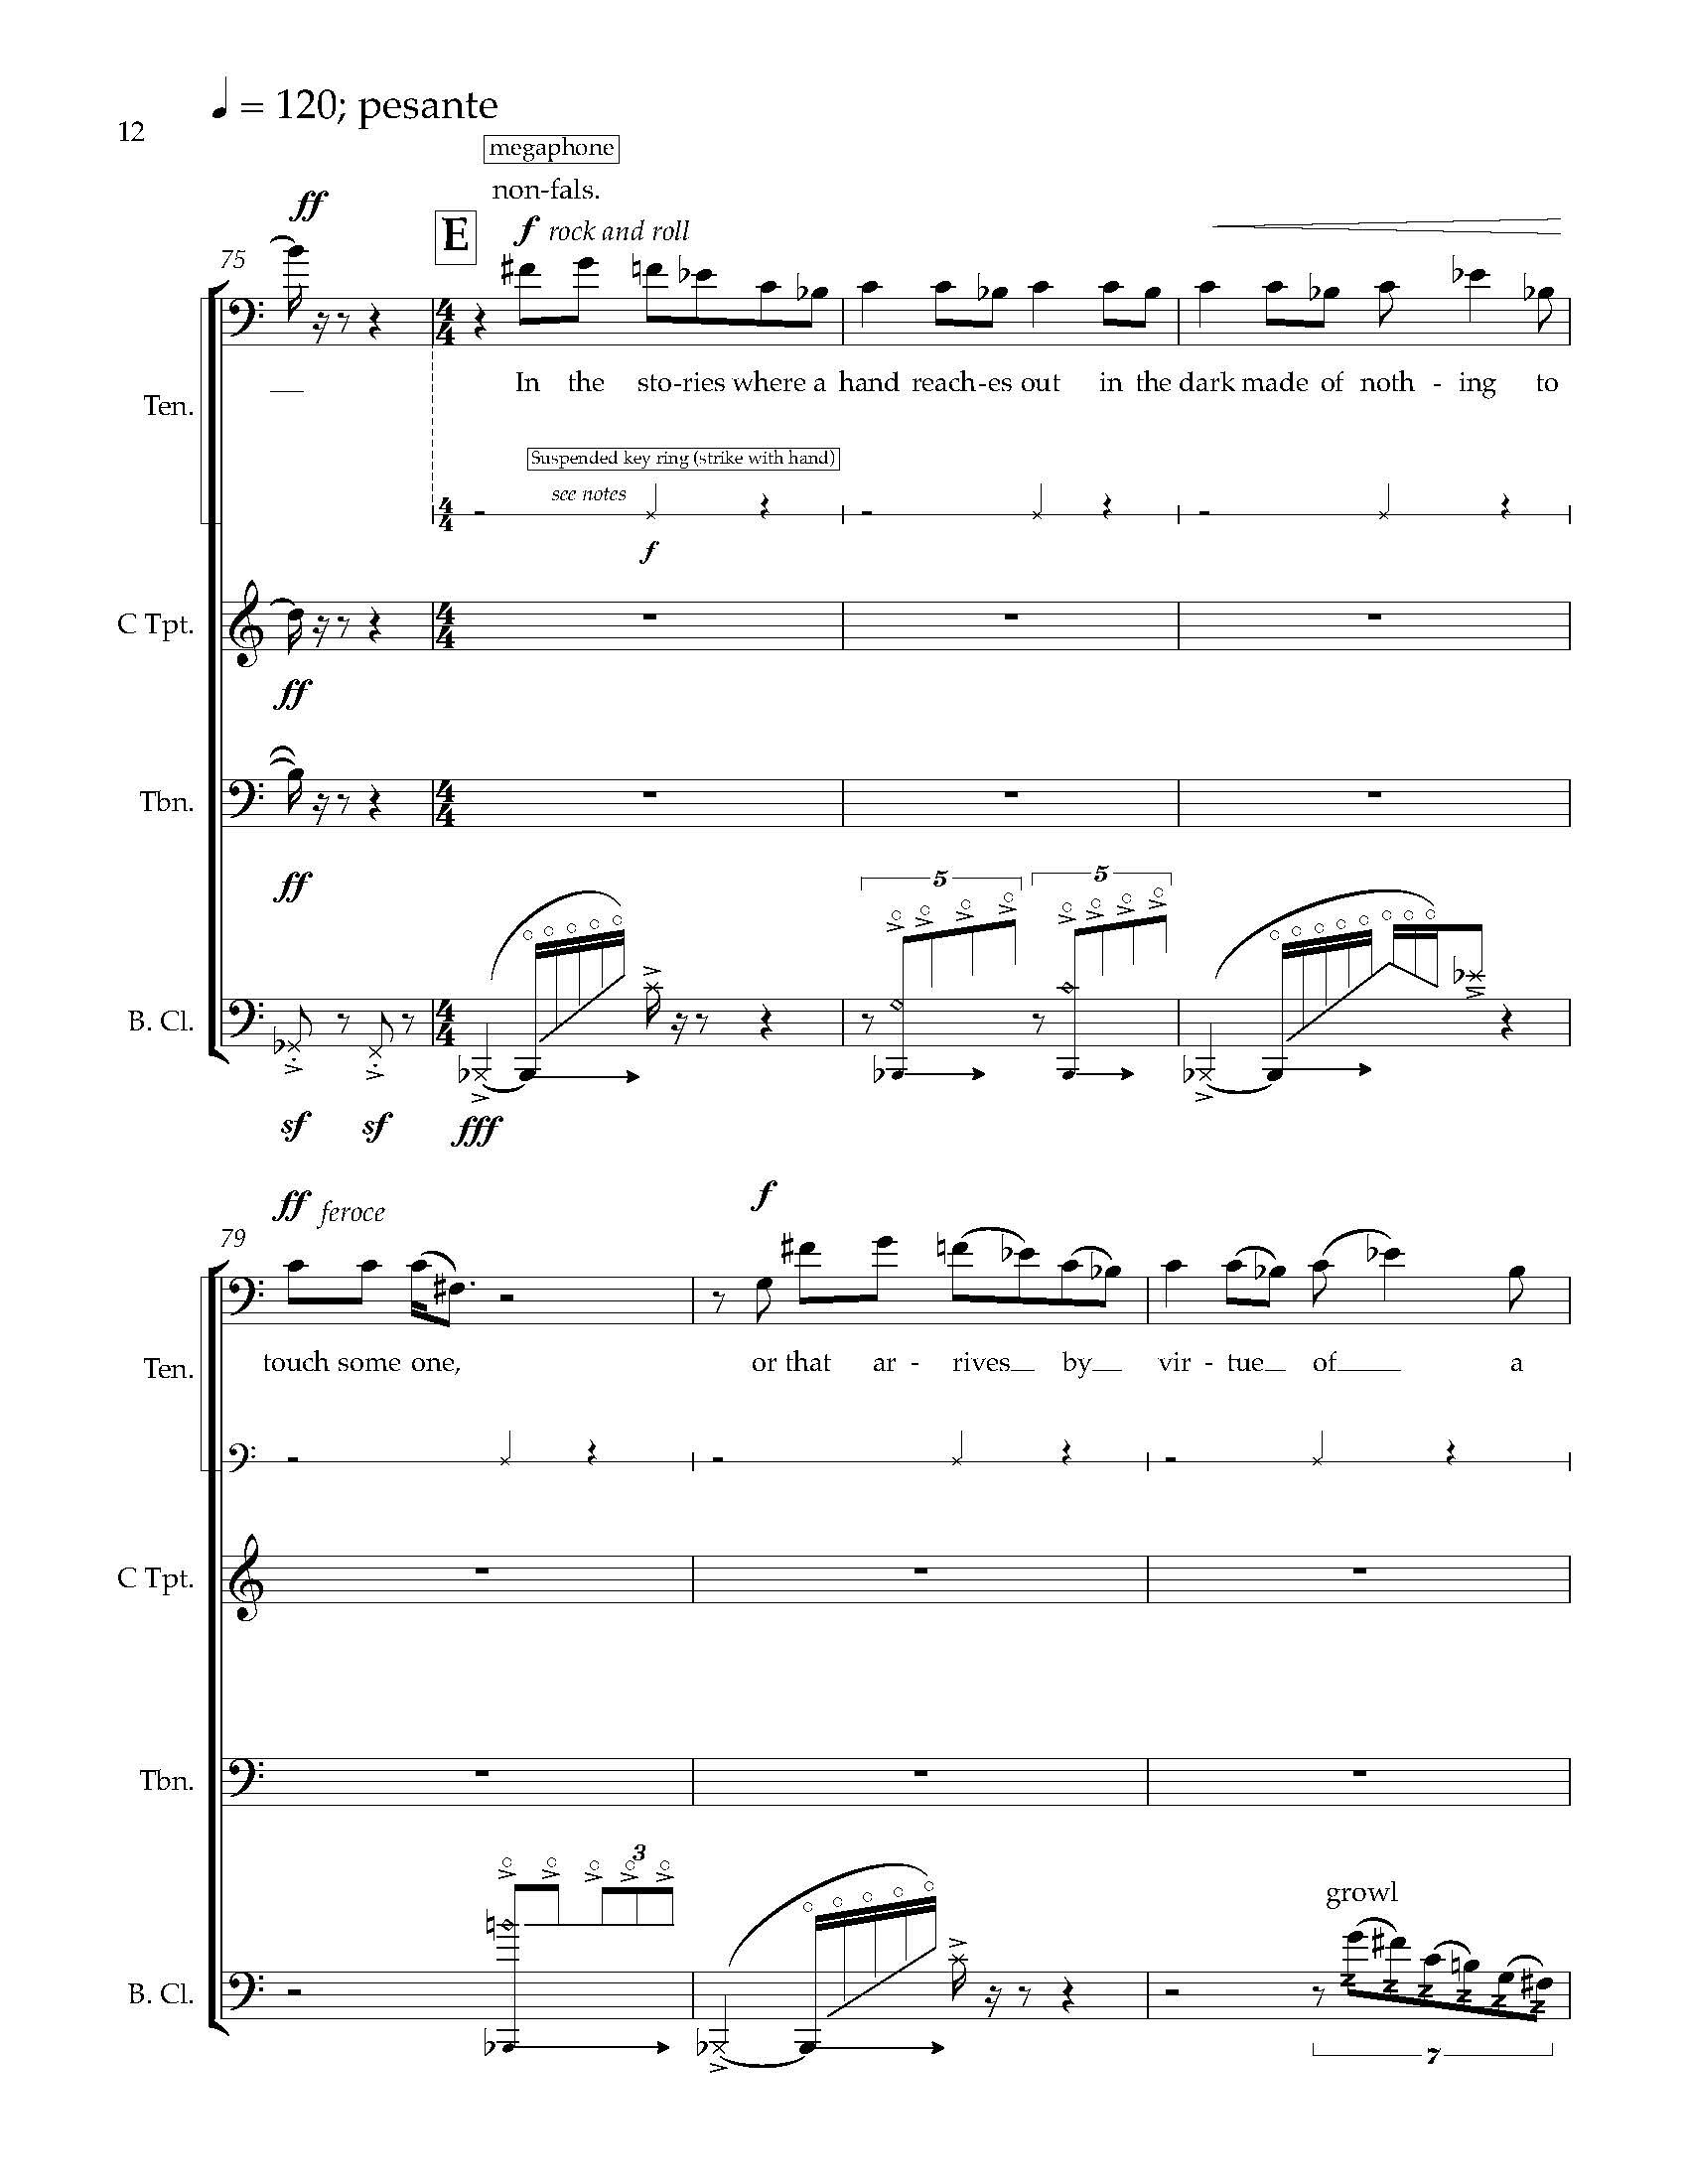 Many Worlds [1] - Complete Score_Page_21.jpg